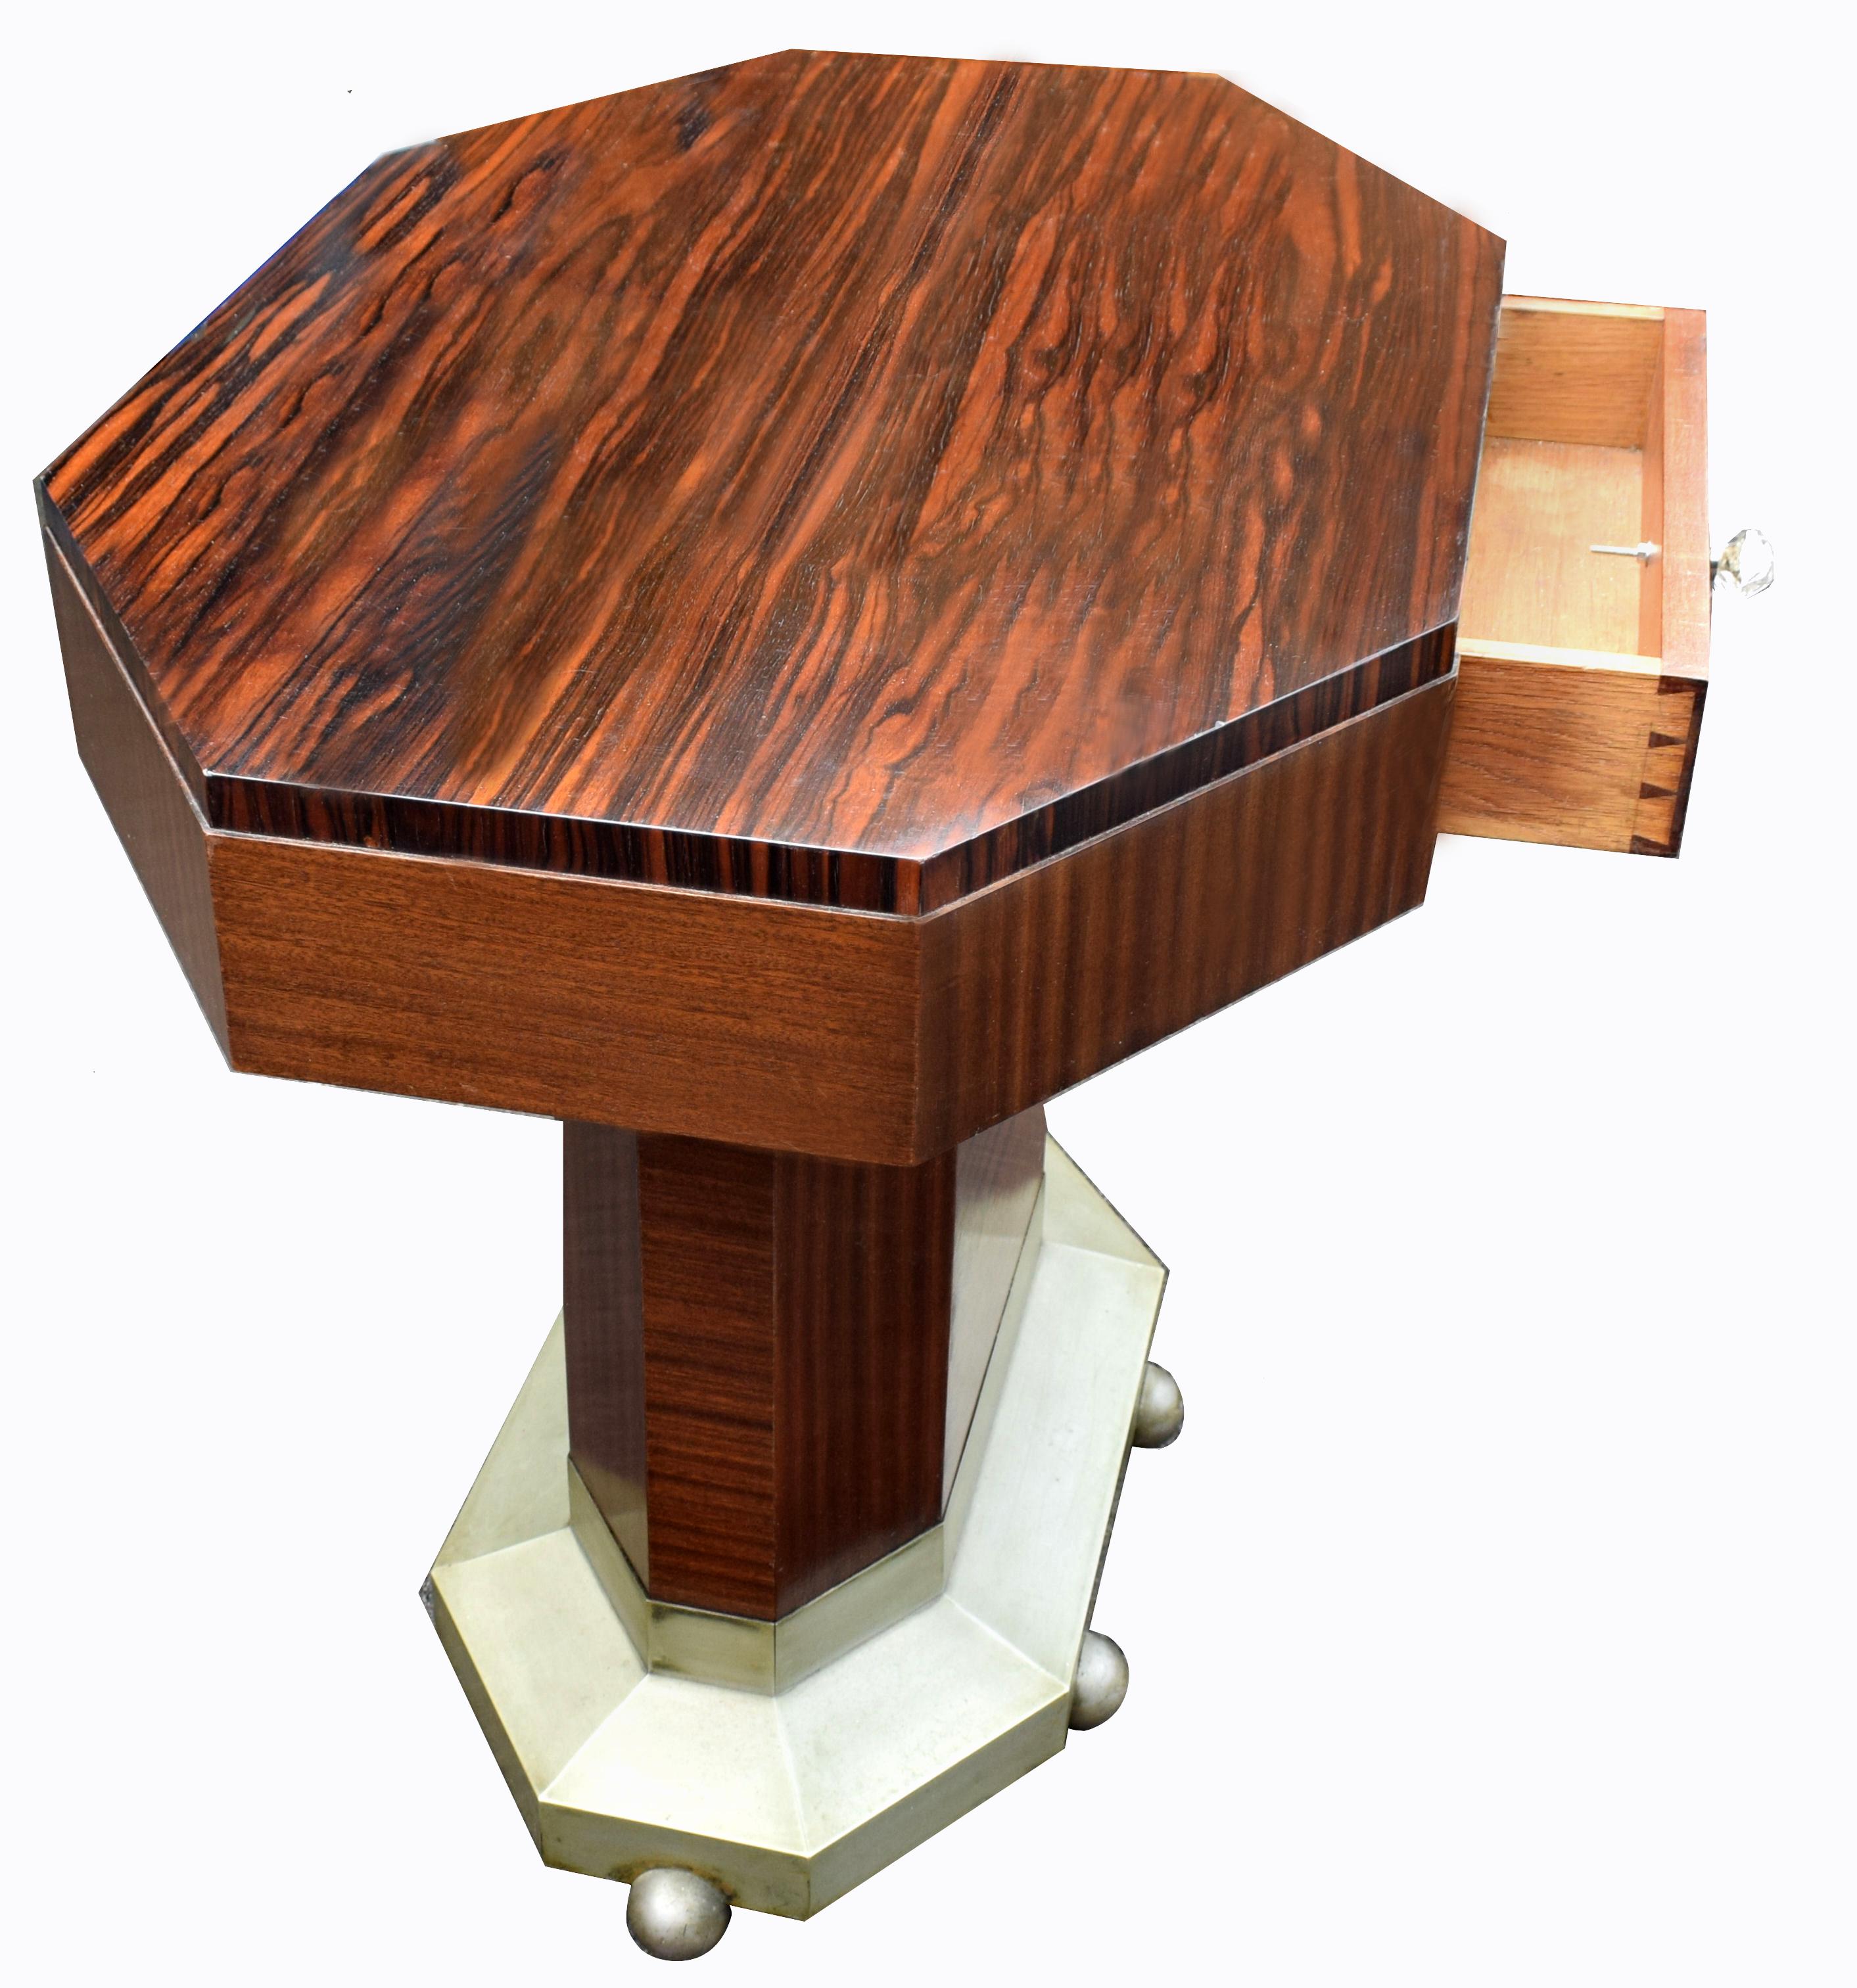 French Art Deco Modernist Center Table in Ebony Macassar, circa 1935 For Sale